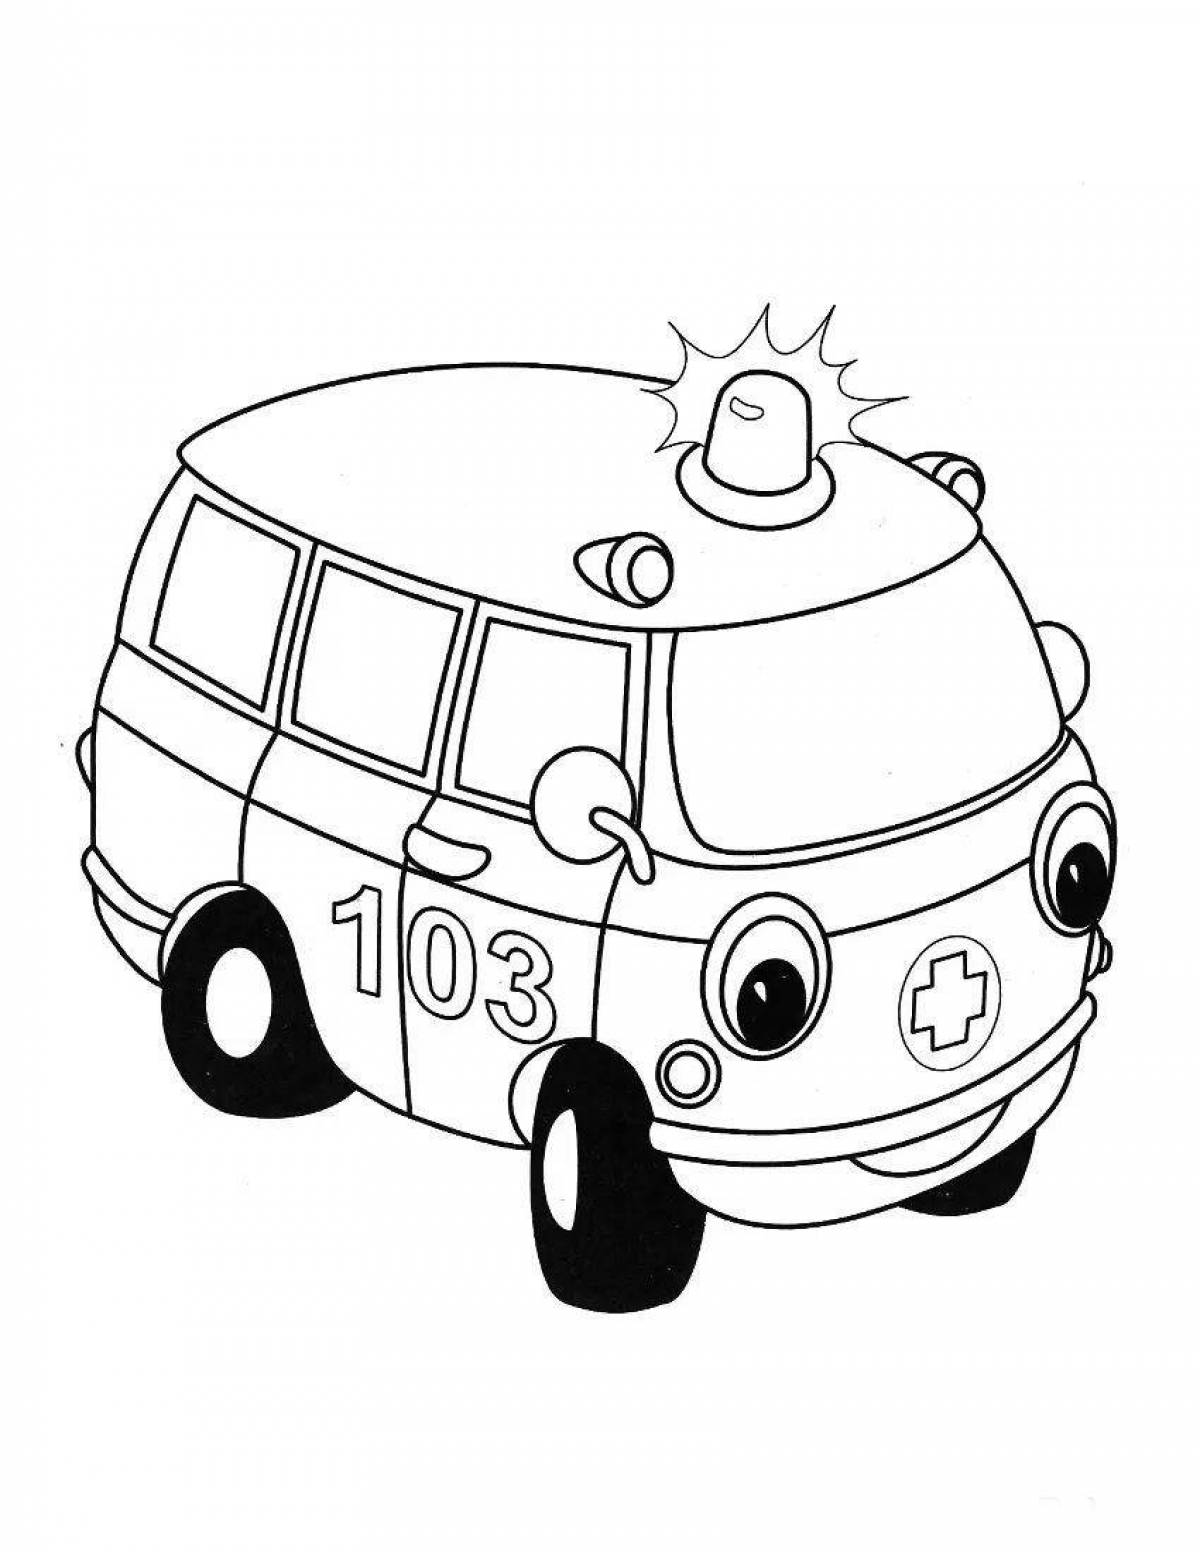 Joyful ambulance coloring pages for boys